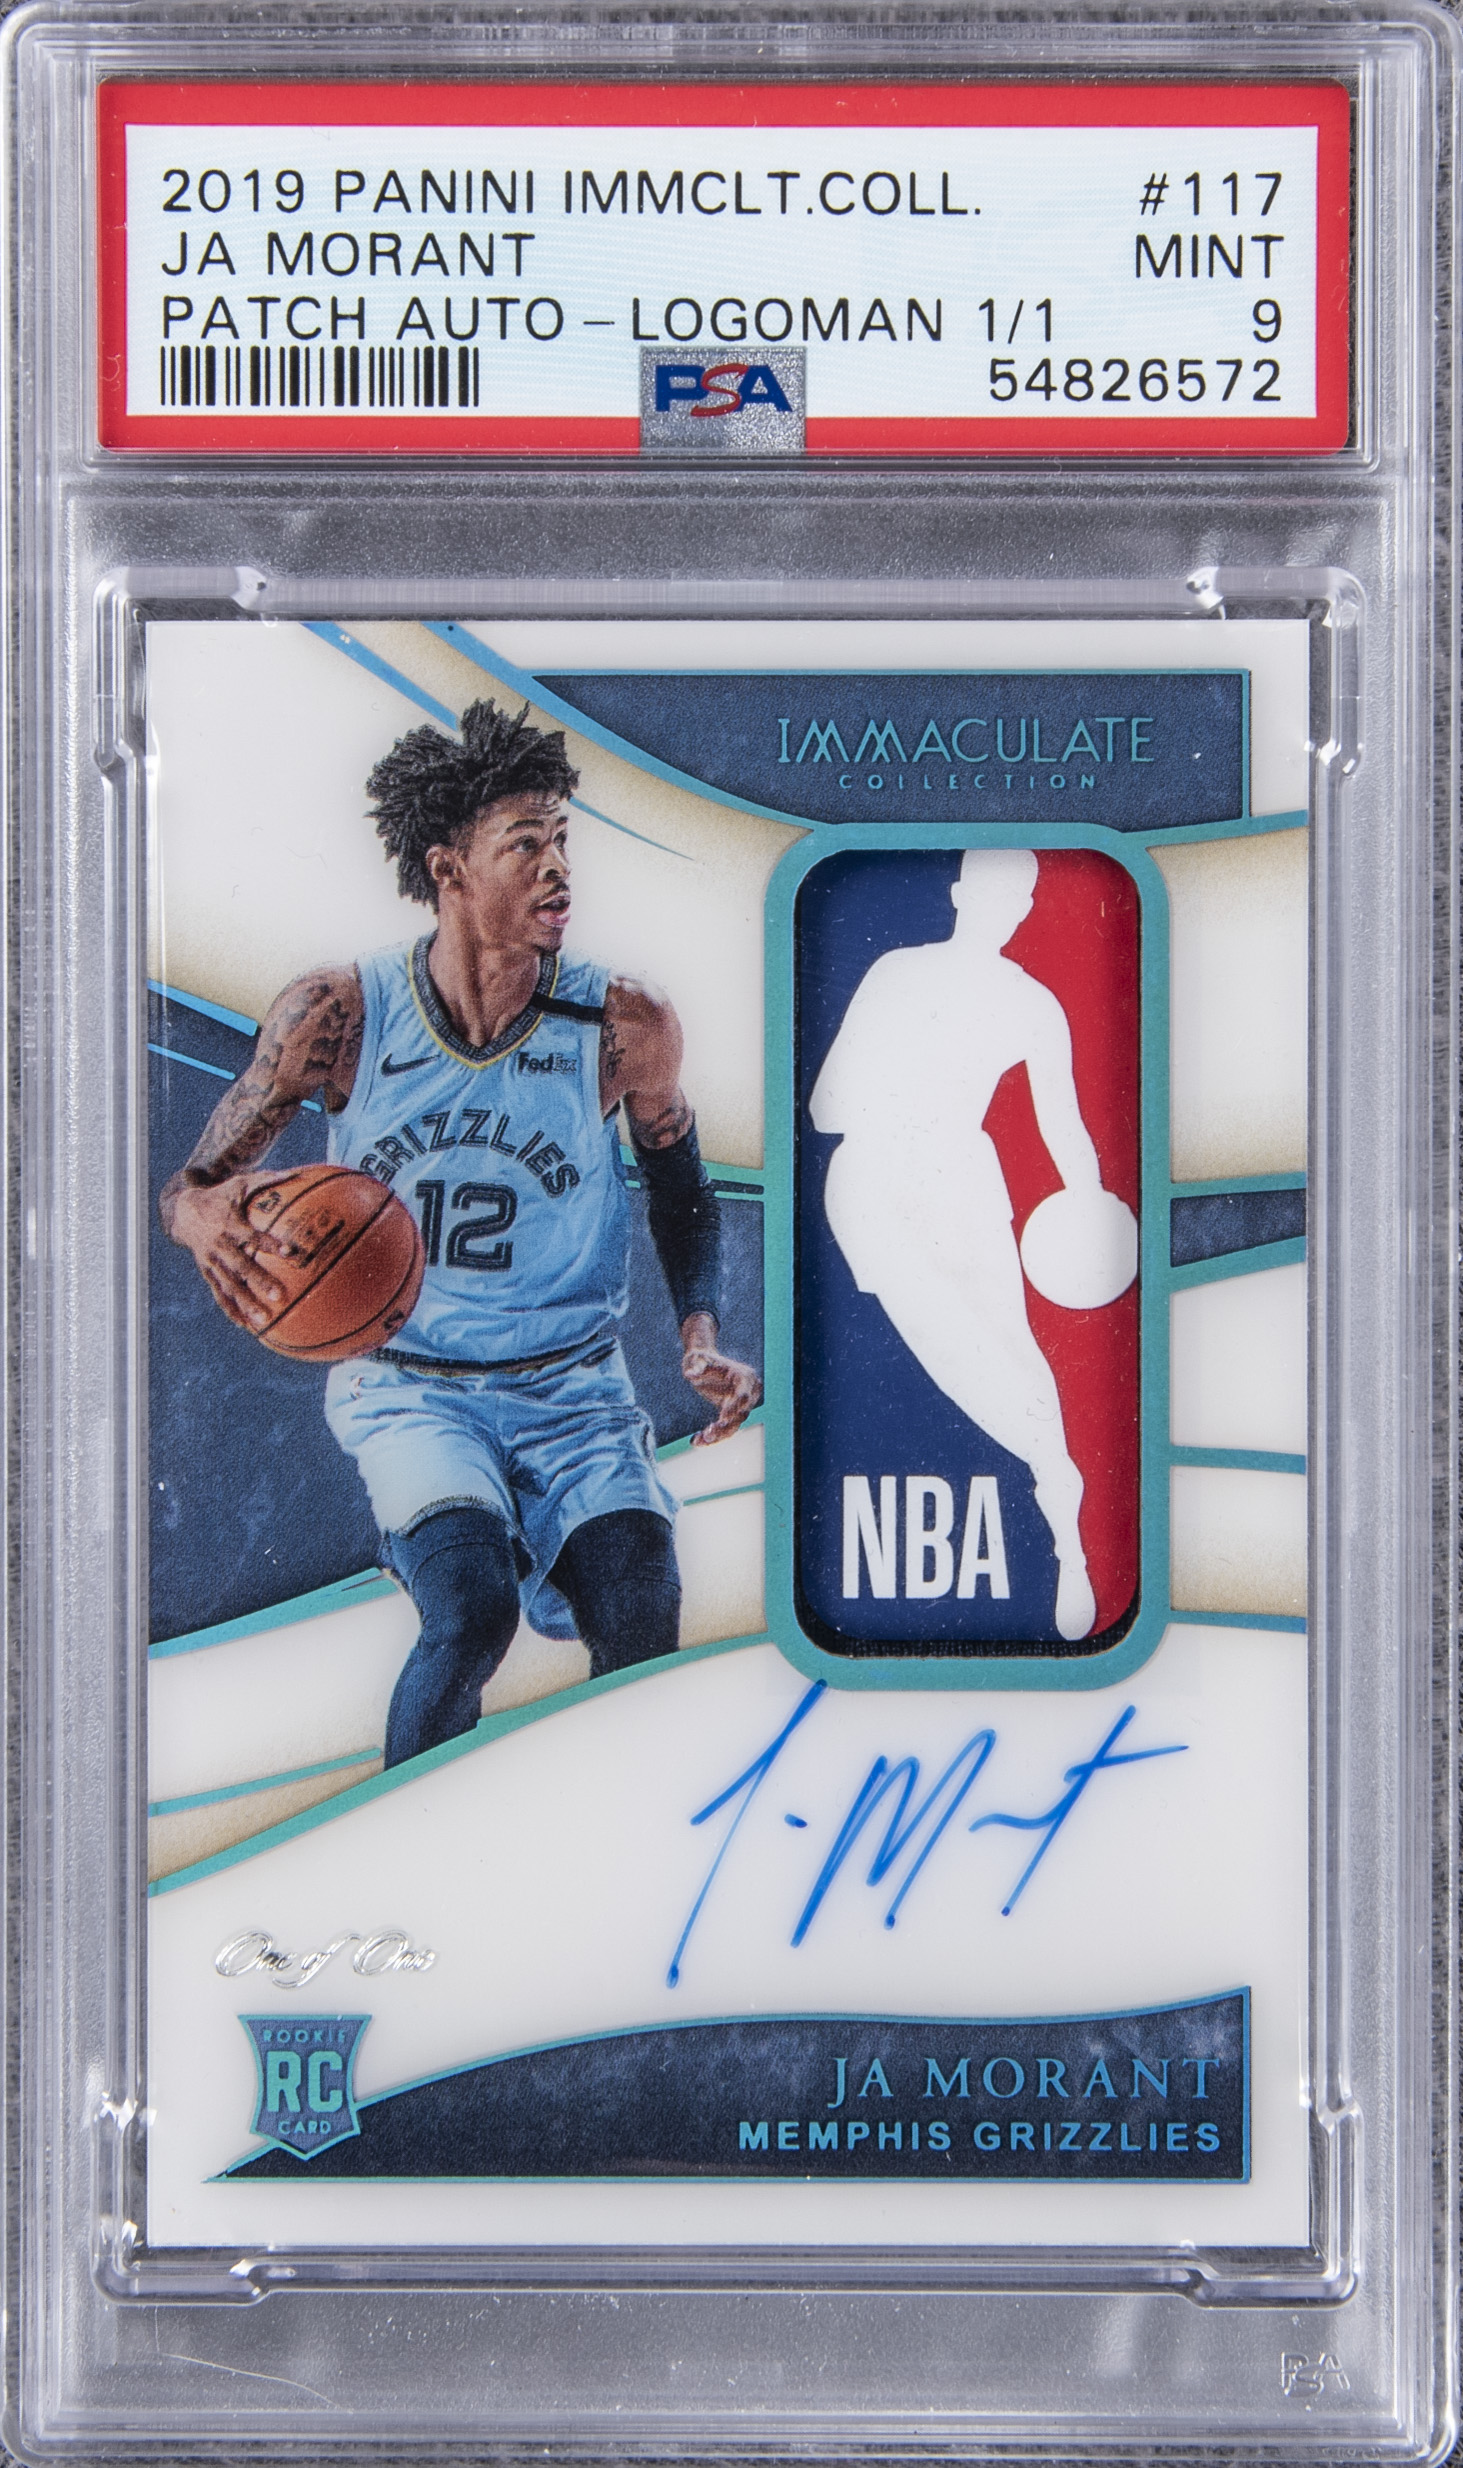 2019-20 Panini "Immaculate Collection" #117 Ja Morant Signed Logoman Patch Rookie Card (#1/1) – PSA MINT 9